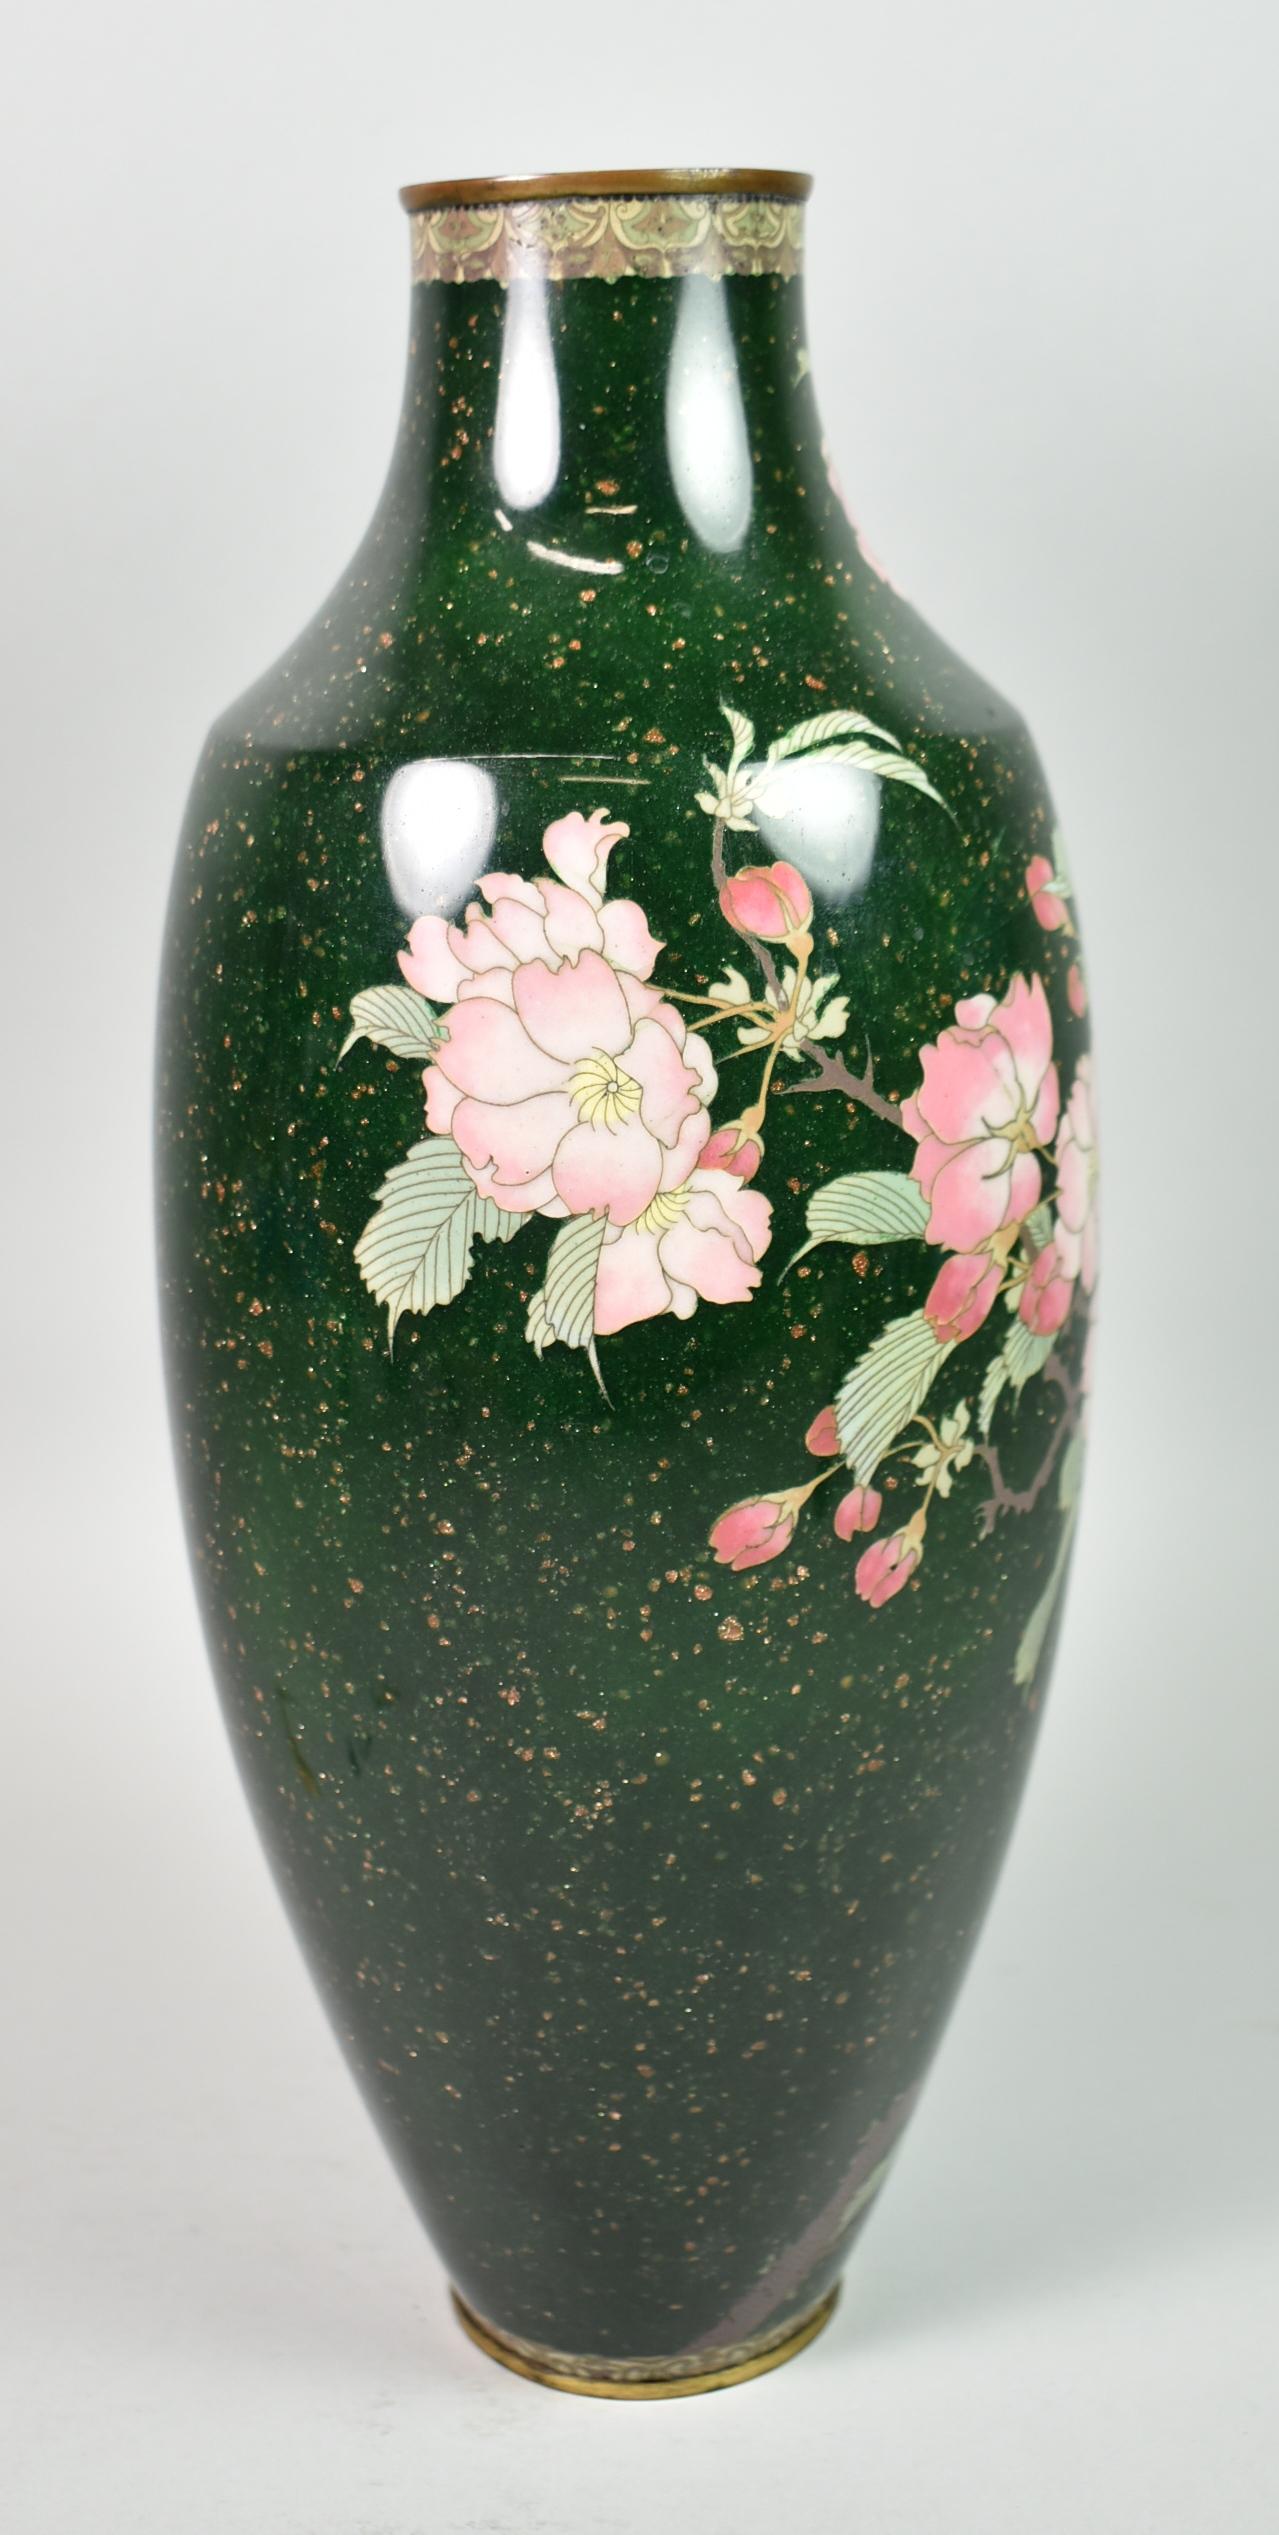 20th Century Japanese Baluster Cloisonne Vase with Plum Blossom Detail For Sale